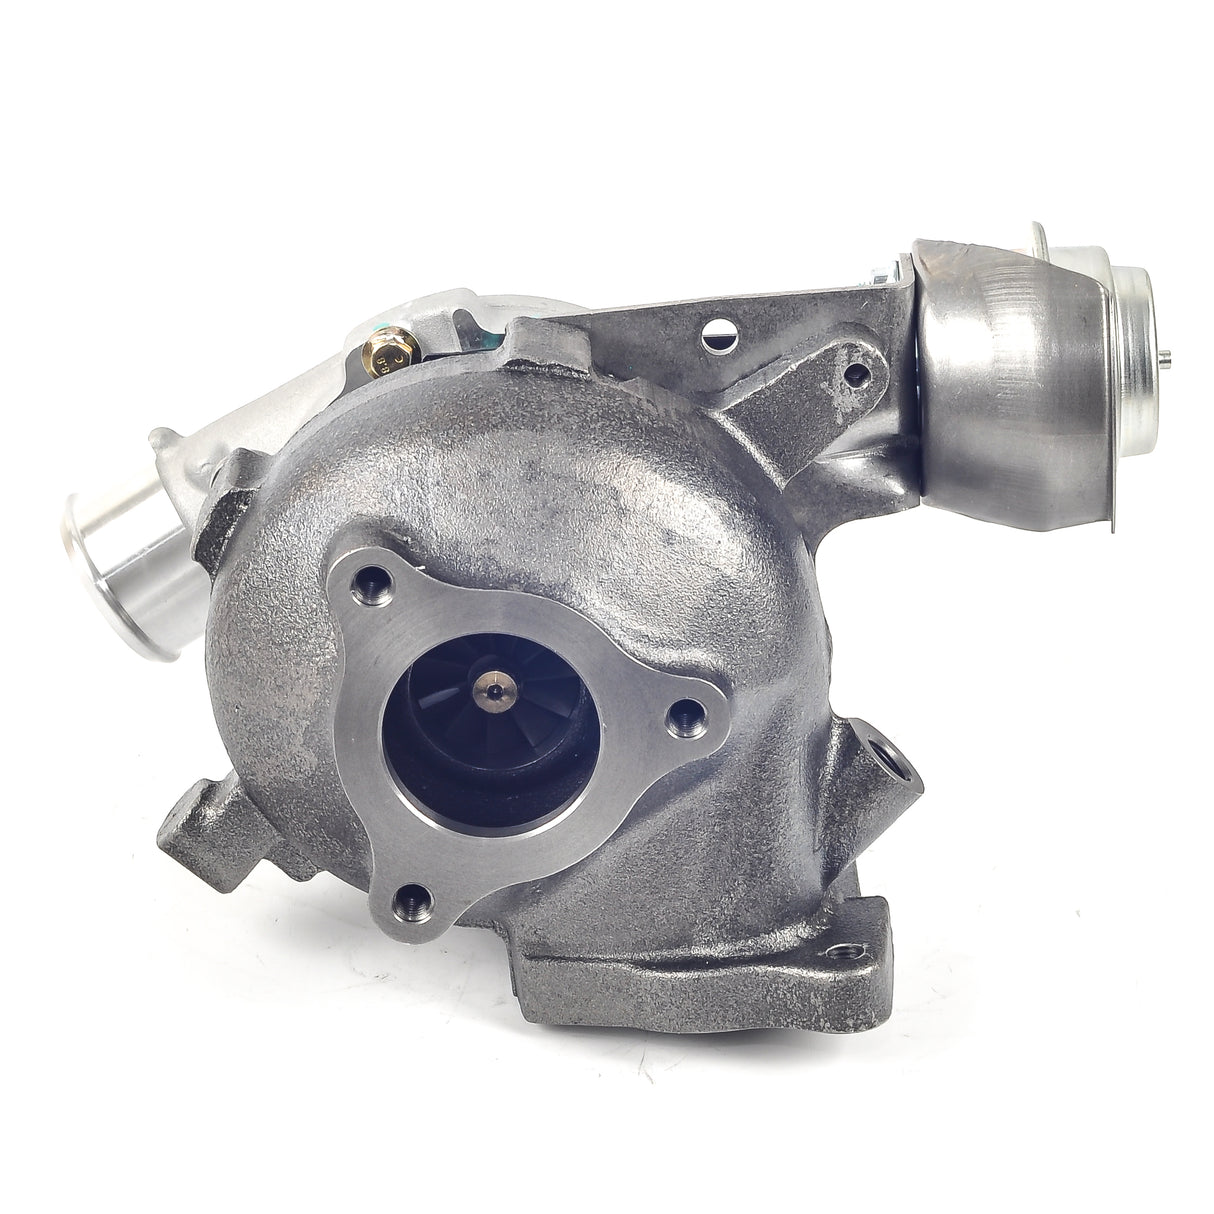 CCT Stage 1 High Flow Turbocharger To Suit Hyundai i30/Accent/Verna/Getz/Kia Rio/CEED D4F 1.60LTR 2A400/2A610